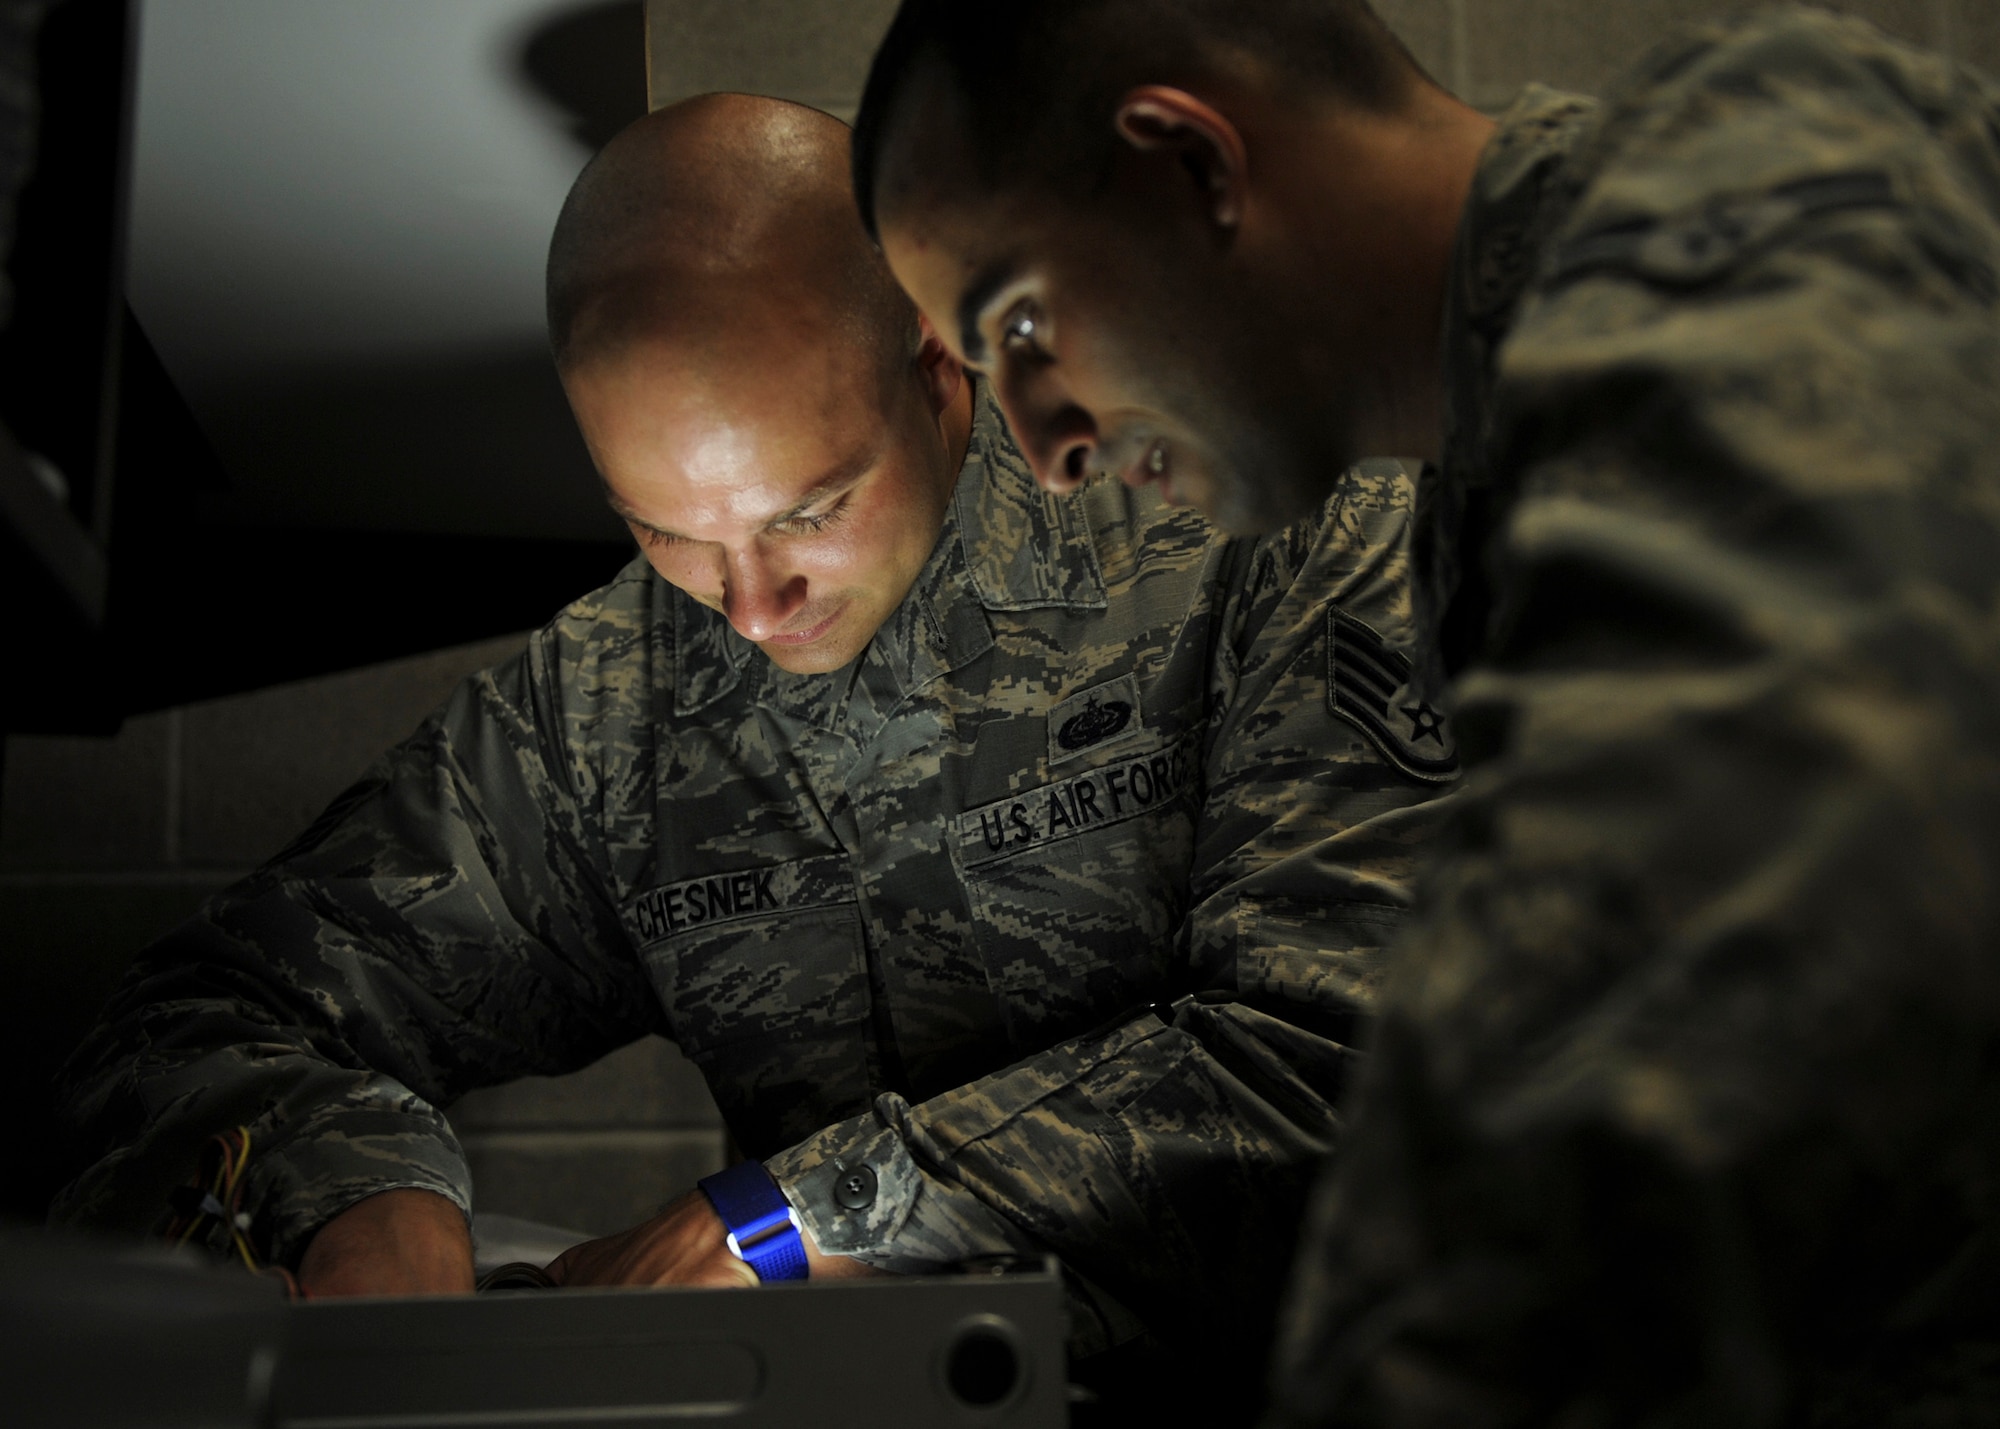 U.S. Air Force Staff Sgt. Chris Chesnek, 325th Communications Squadron client systems supervisor, instructs U.S. Air Force Airman 1st Class Mike Magliaro, 325th CS client systems technician, on some common problems when fixing desktop computers at the 325th CS Annex on Tyndall Air Force Base, Fla., Aug. 3, 2016. The client systems technicians are responsible for repairing most base communication functions, such as computers and telephones. (U.S. Air Force photo by Senior Airman Dustin Mullen/Released) 